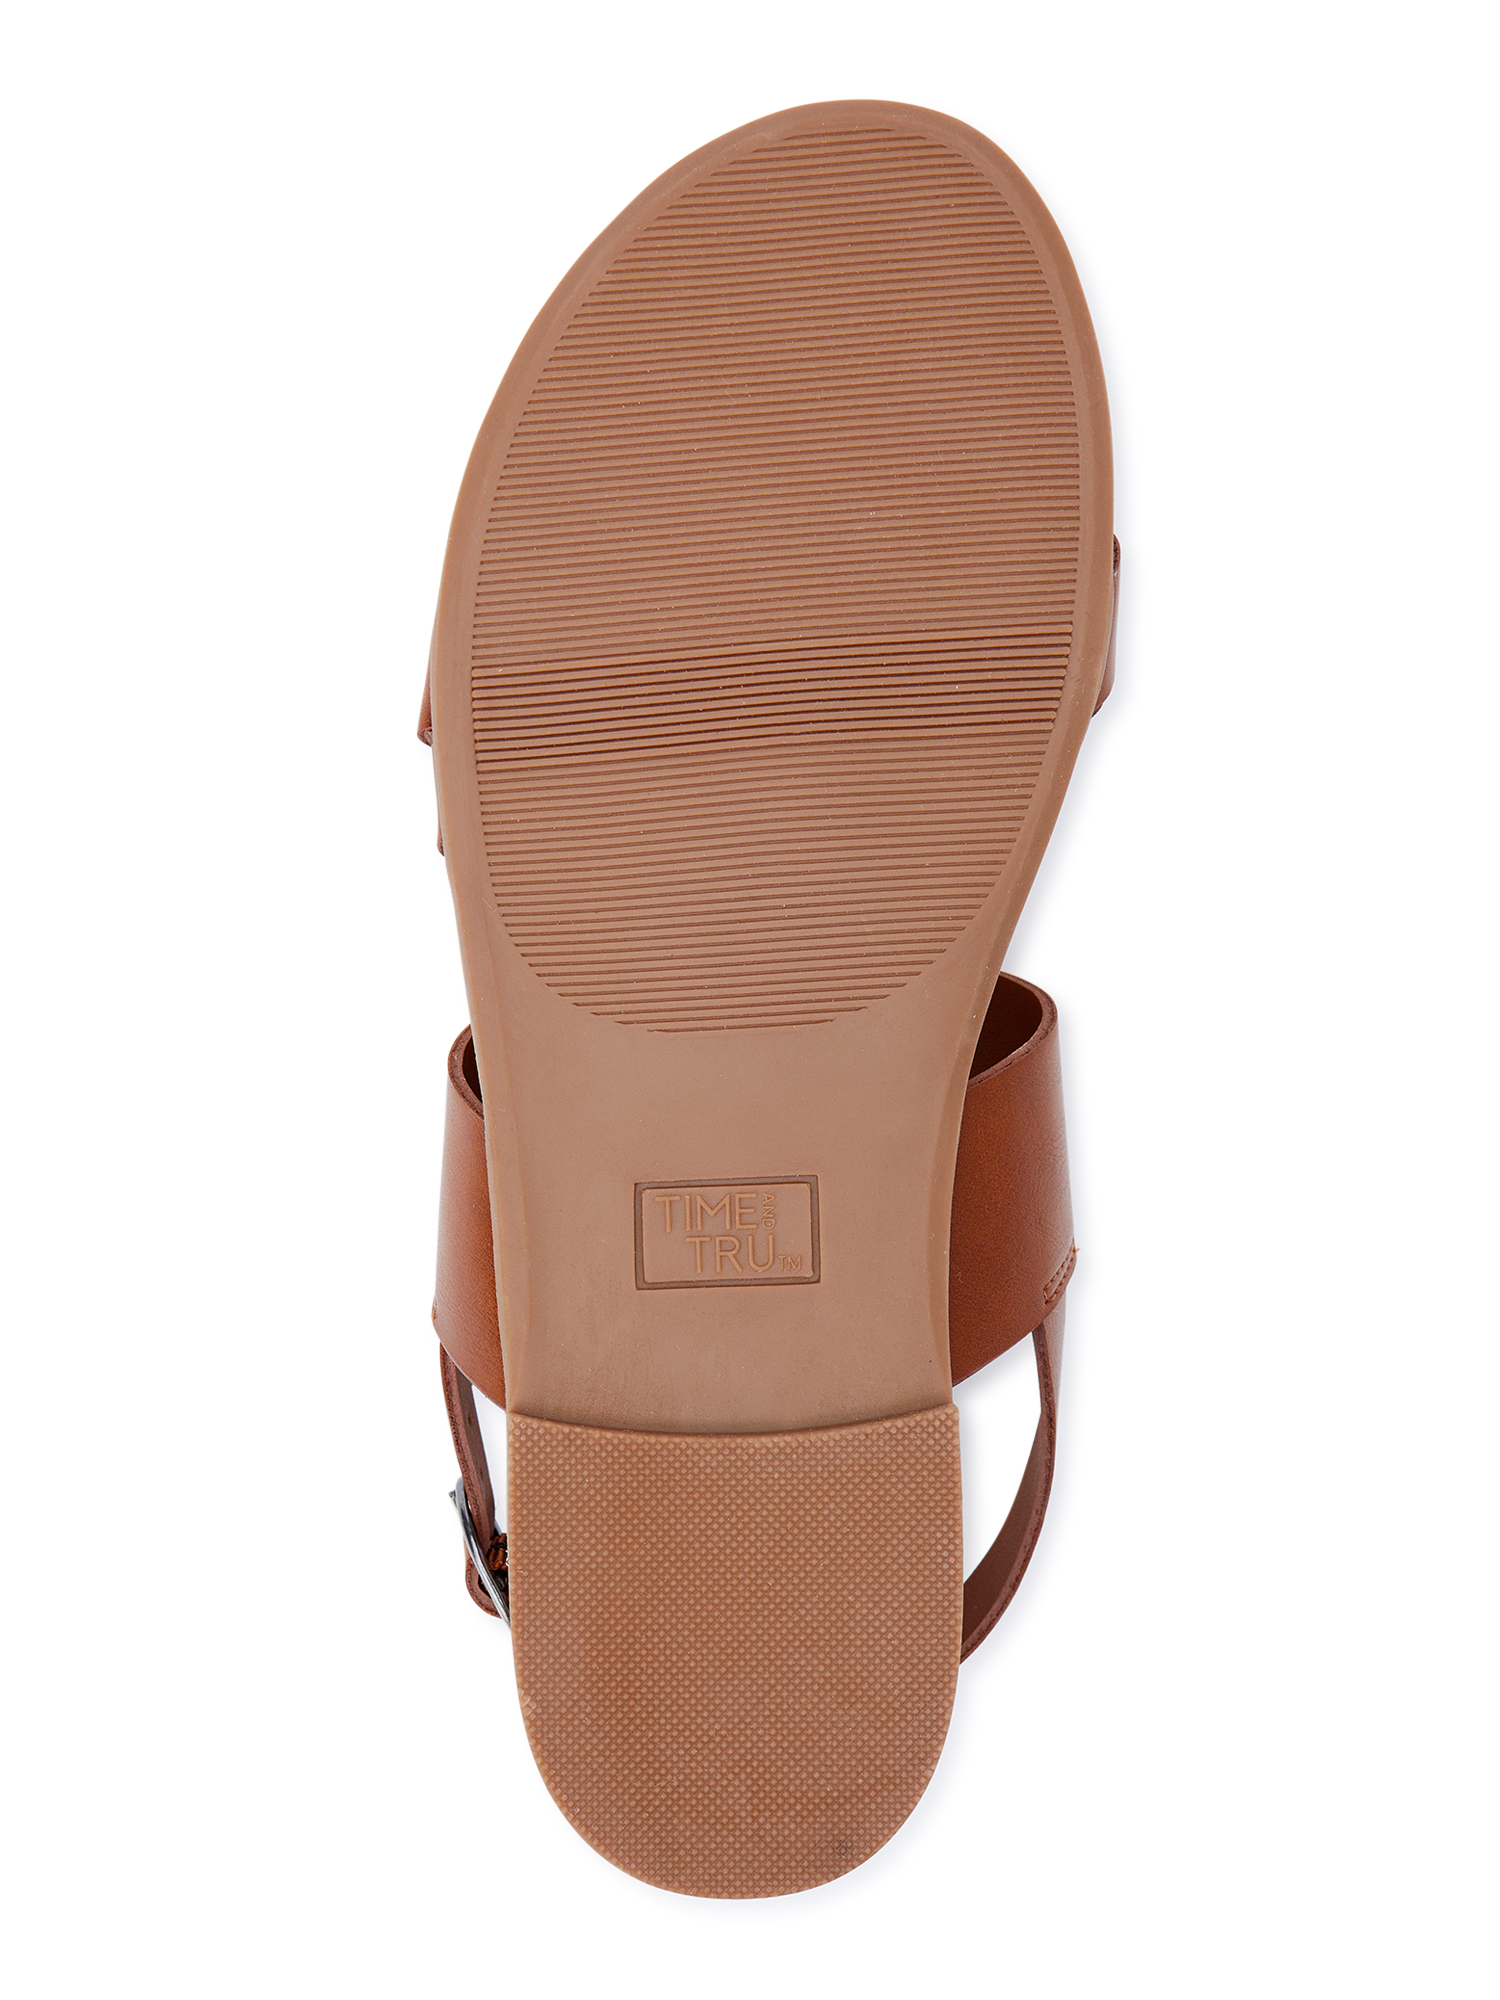 Time and Tru Women's Twist Strap Sandals - image 5 of 5